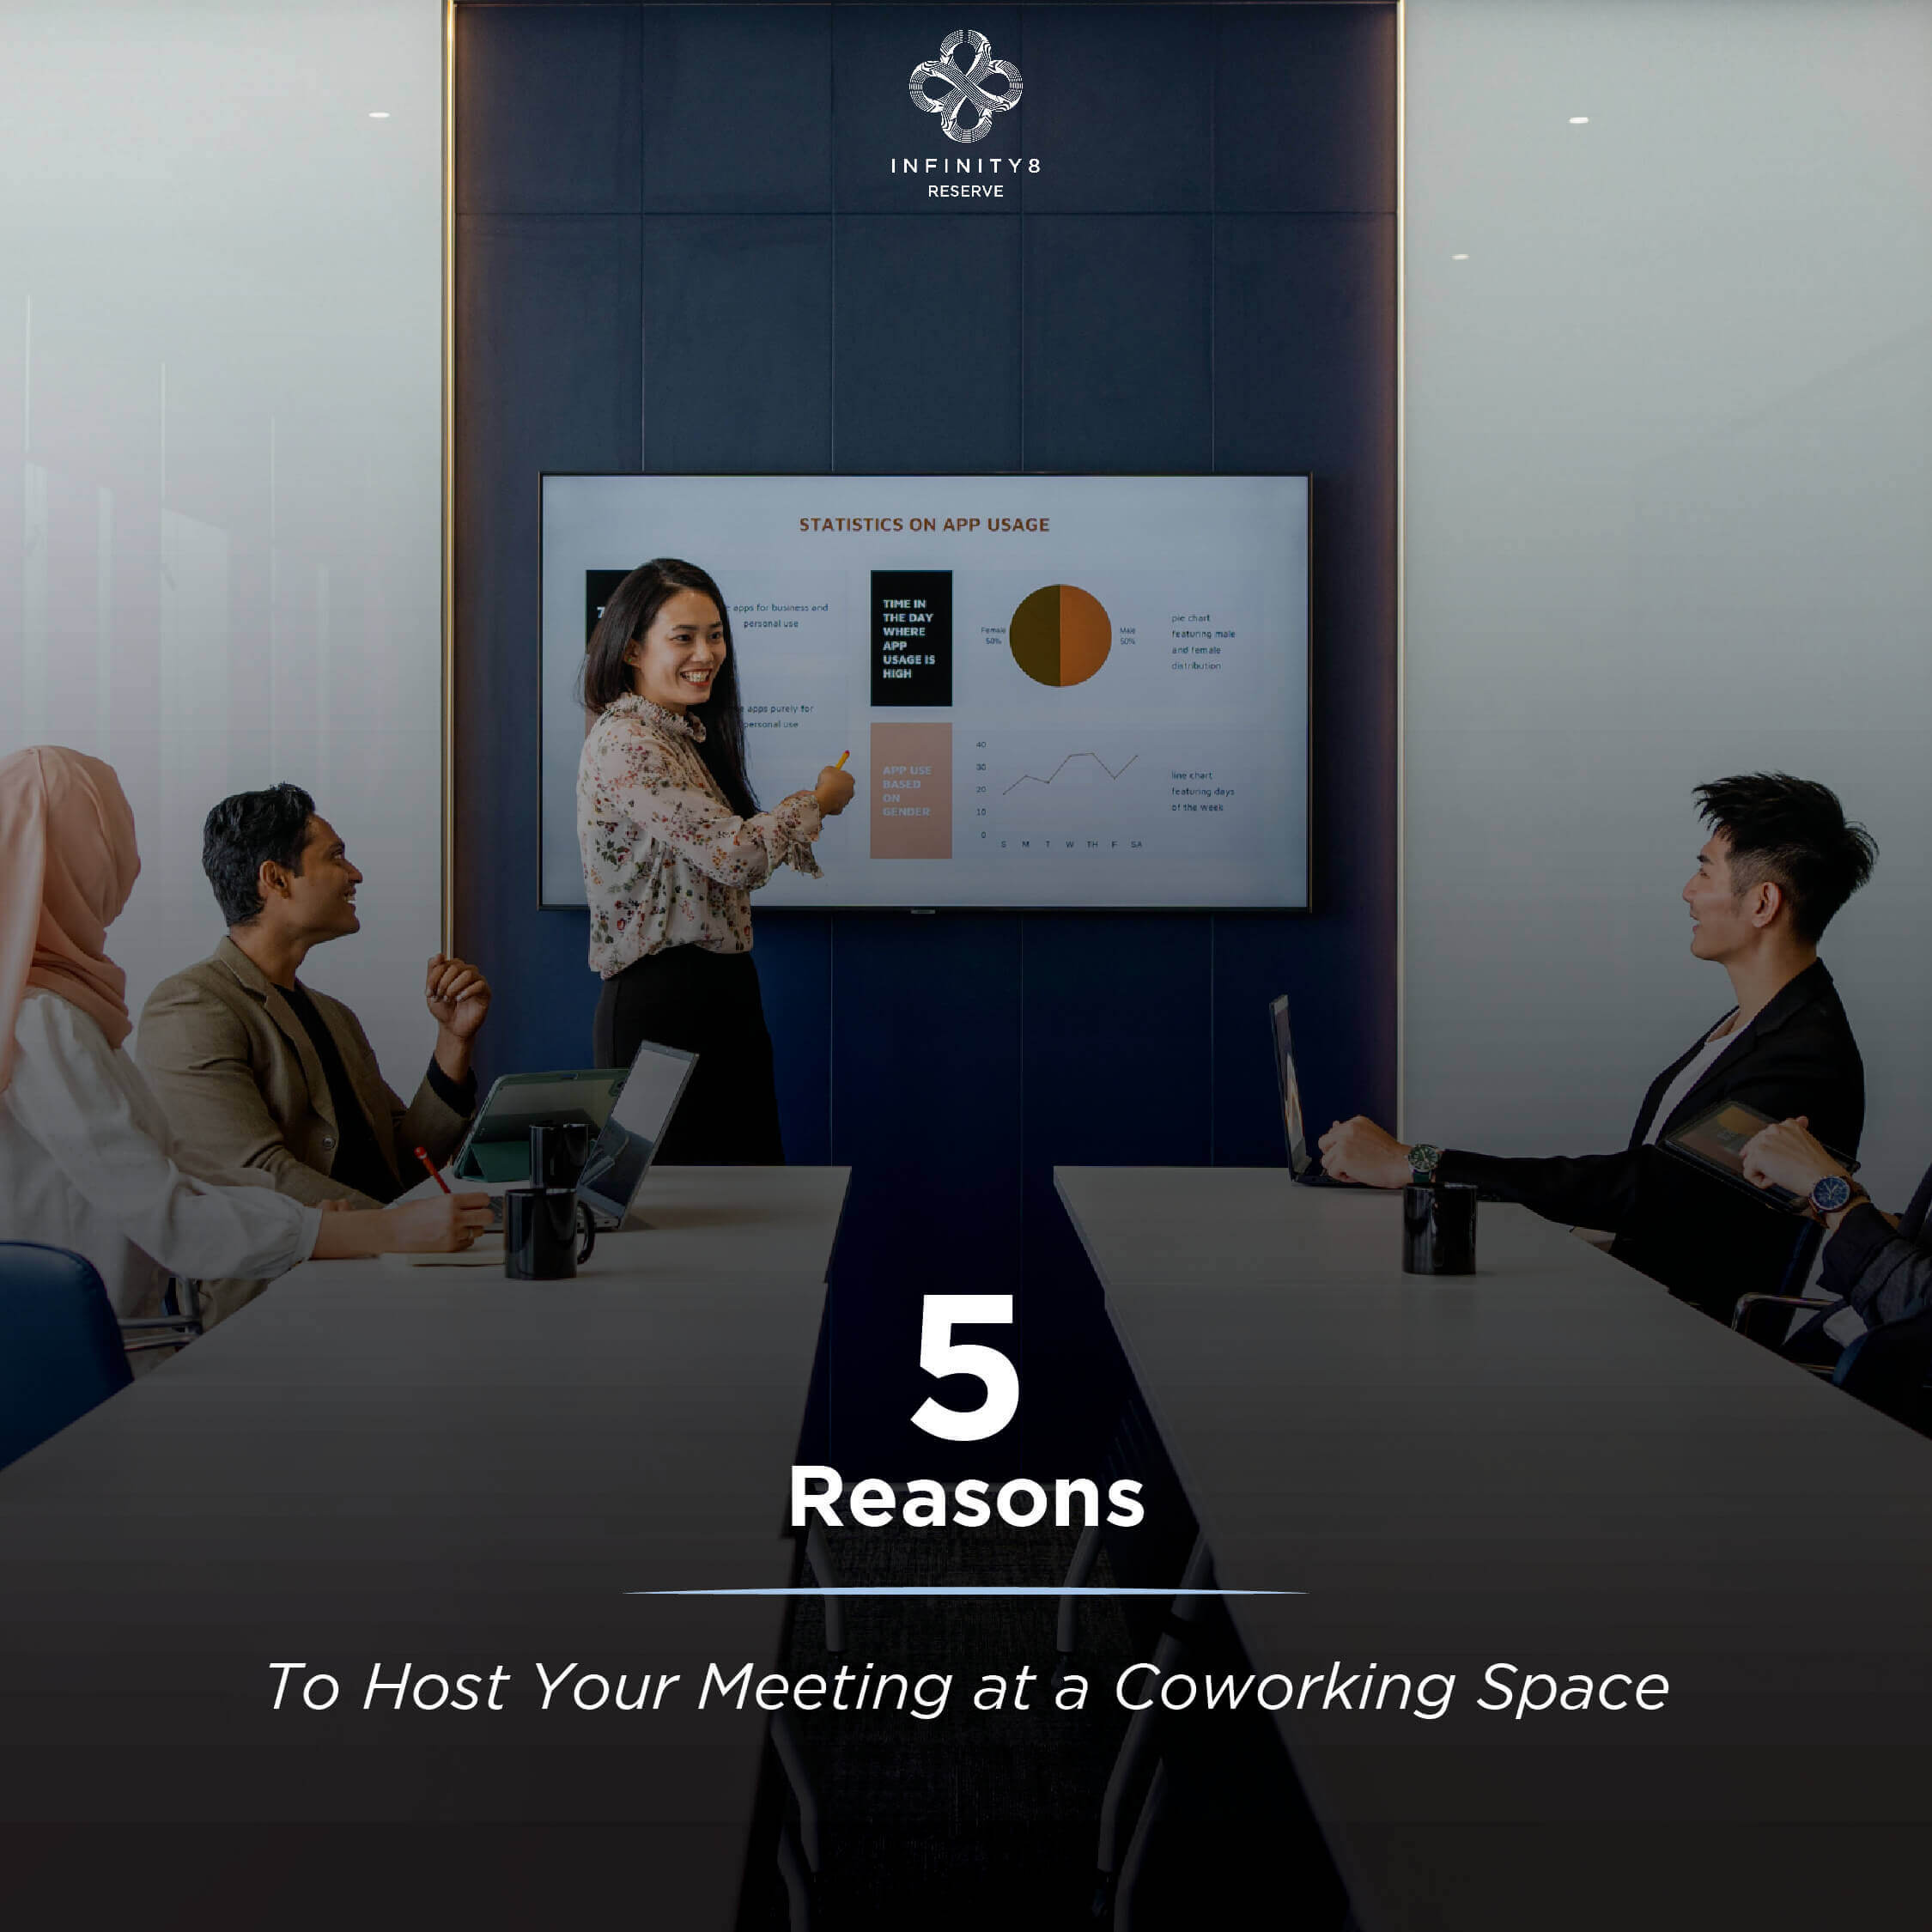 5 Reasons To Host Your Meeting at a Coworking Space